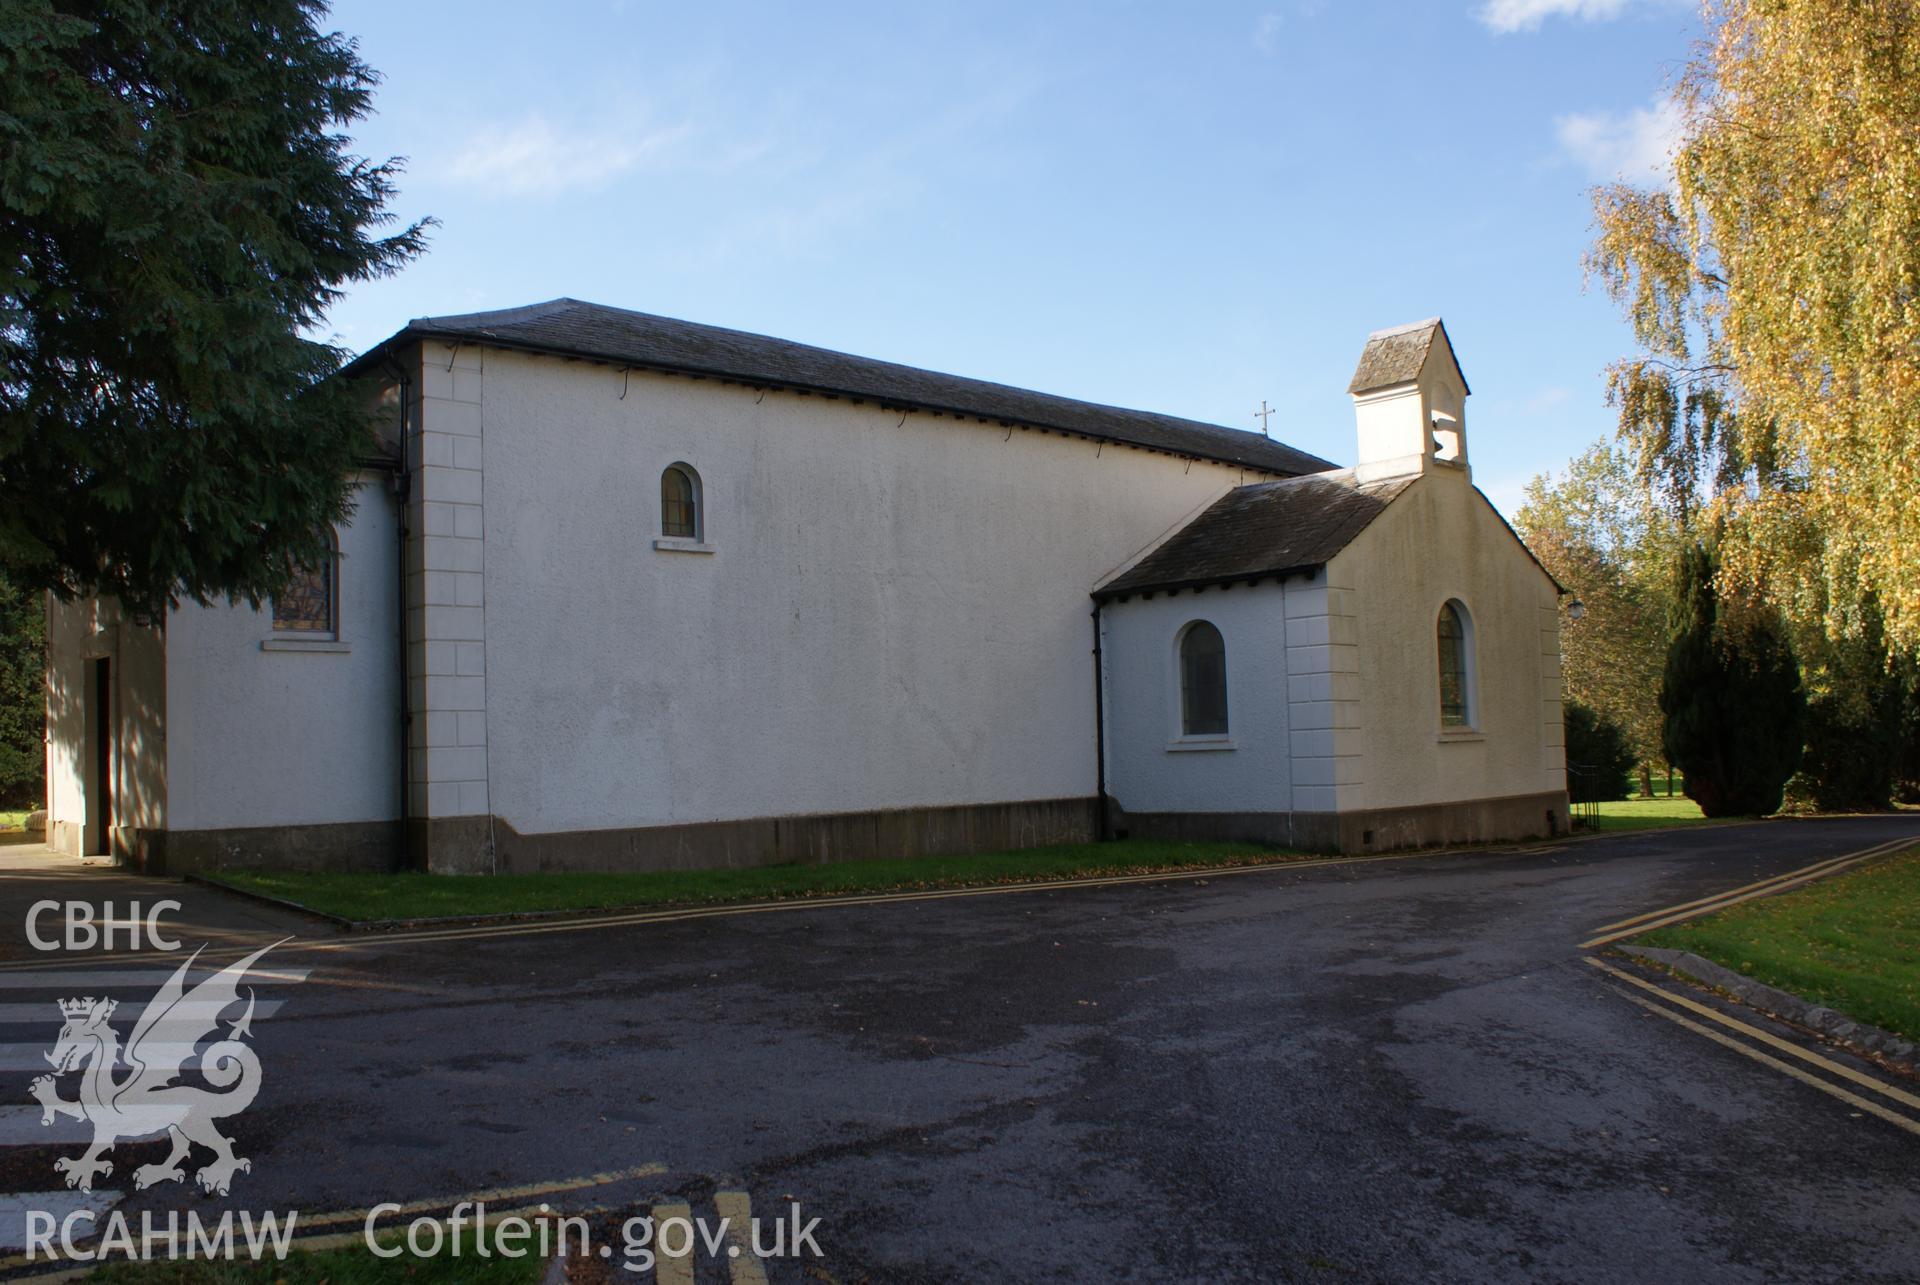 Digital colour photograph showing exterior of St Mary and St Michael Catholic church, Llanarth.